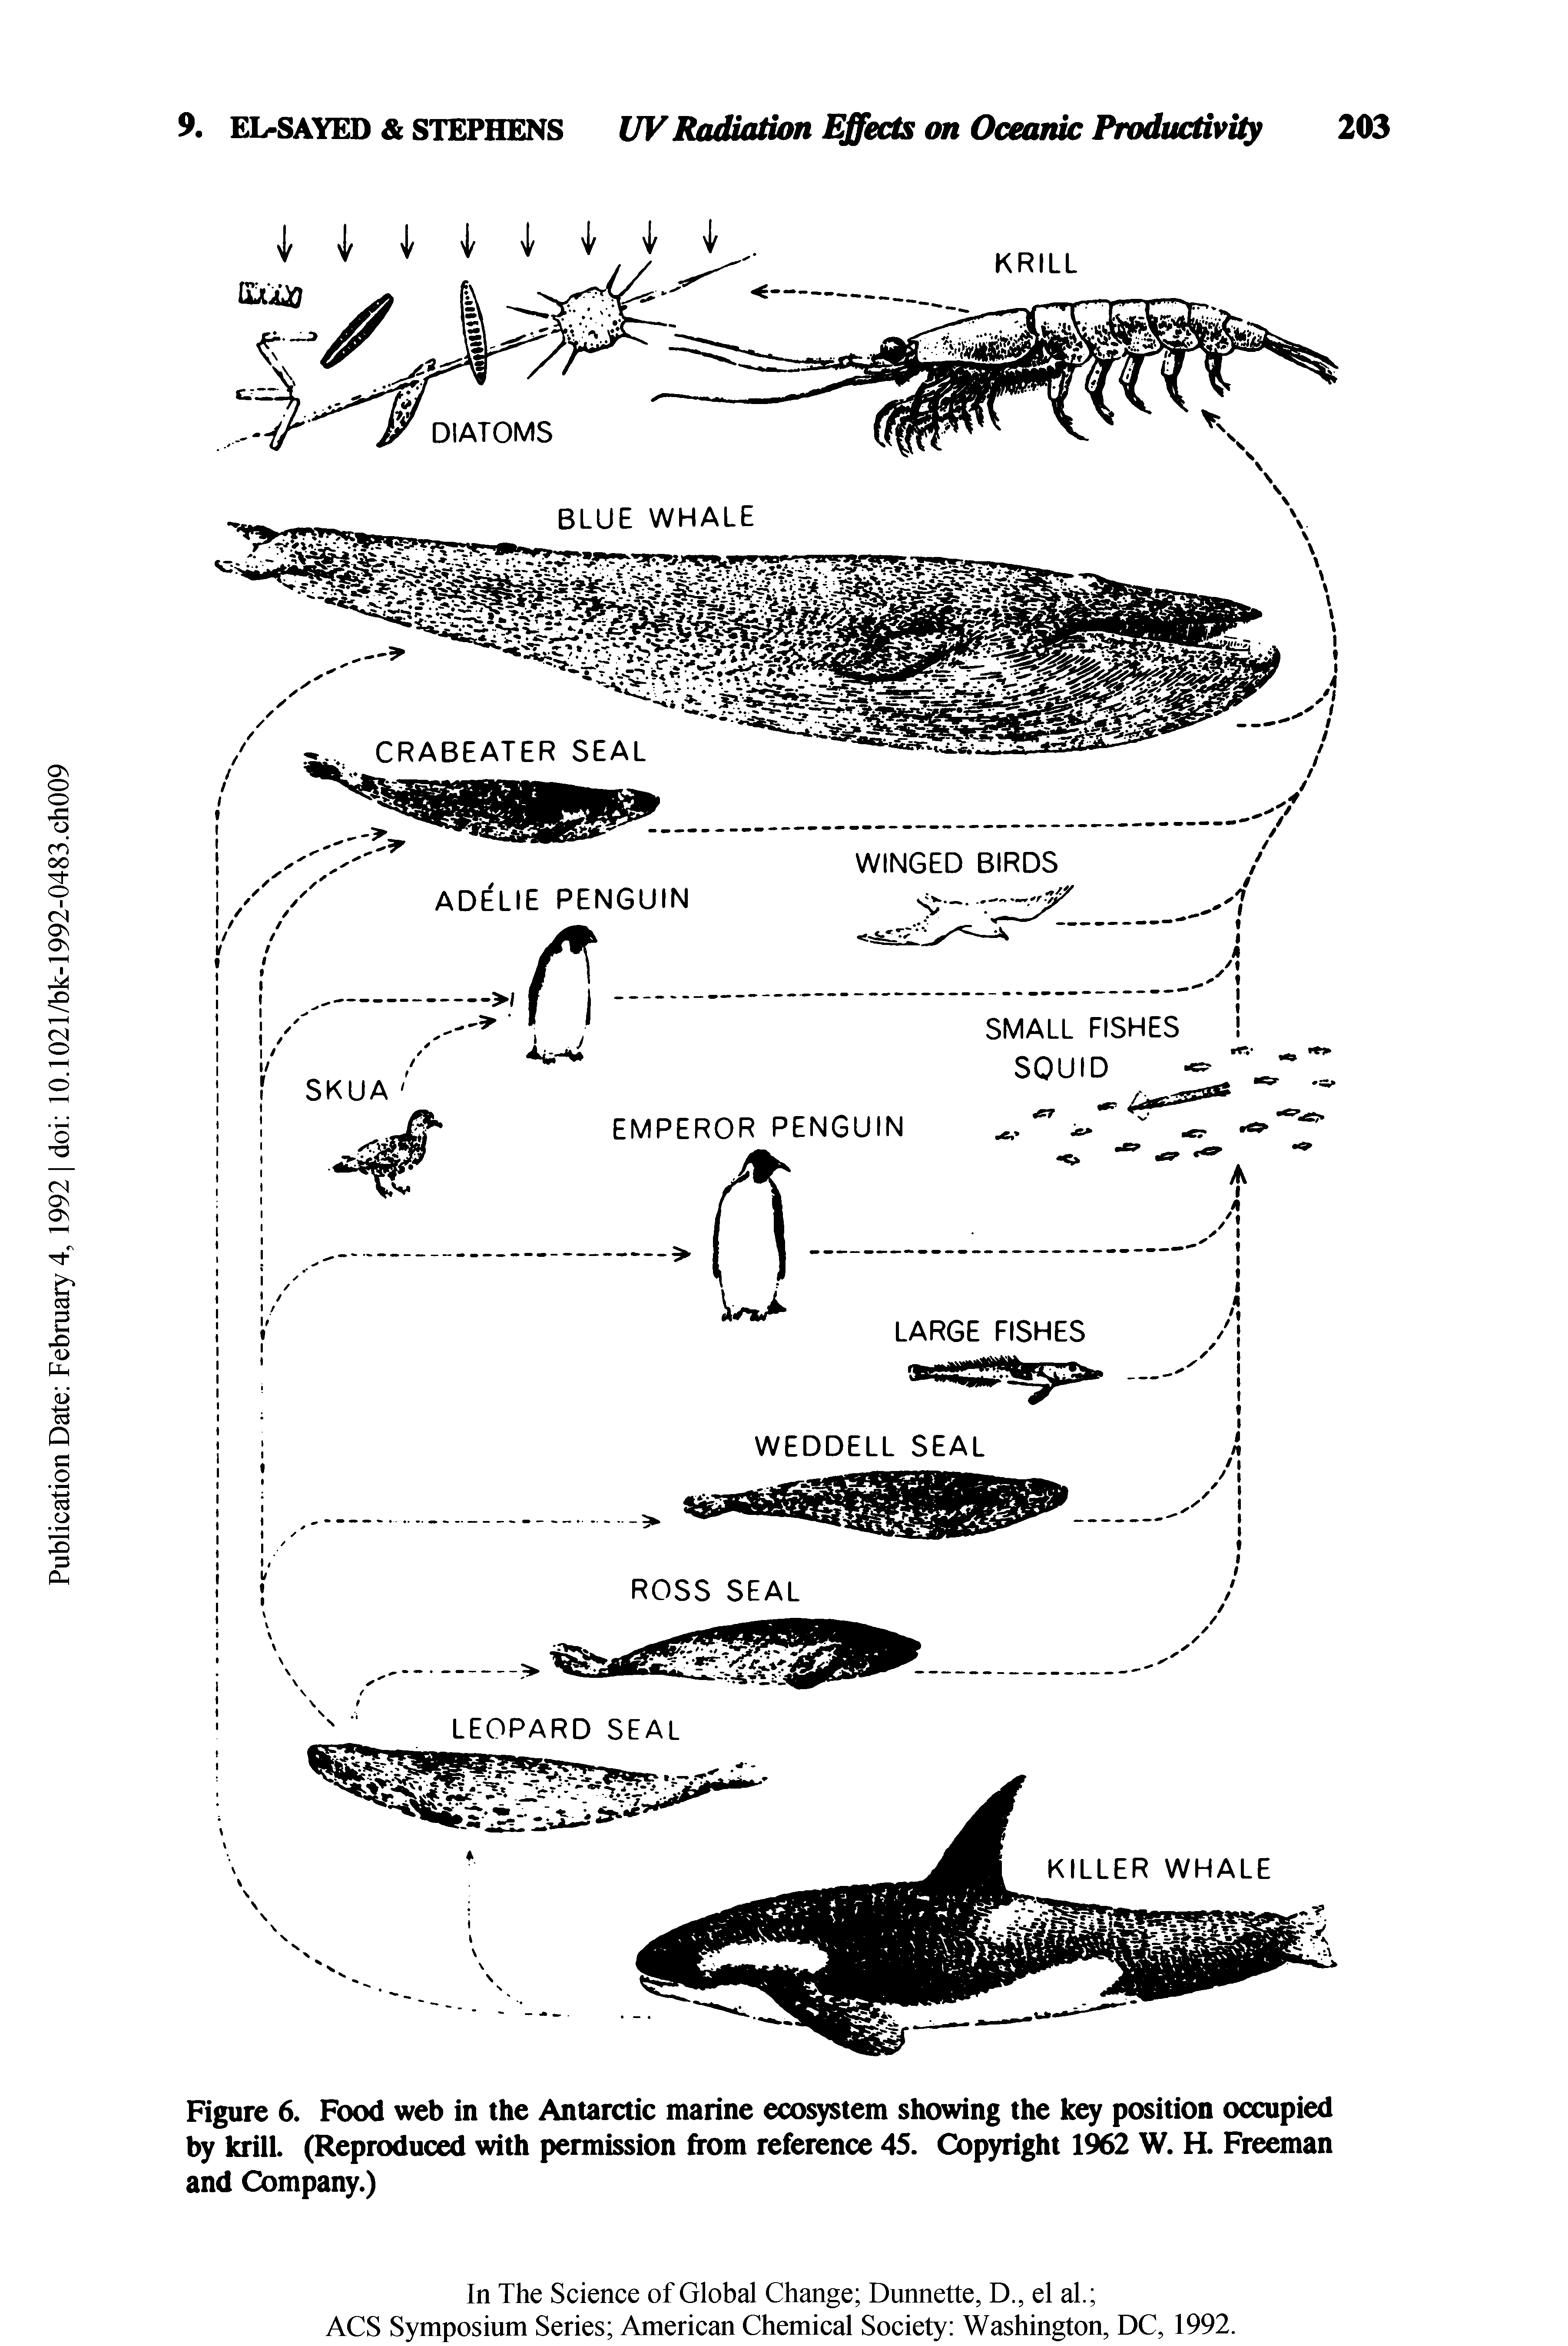 Figure 6. Food web in the Antarctic marine ecosystem showing the key position occupied by krill. (Reproduced with permission from reference 45. Copyright 1962 W. H. Freeman and Company.)...